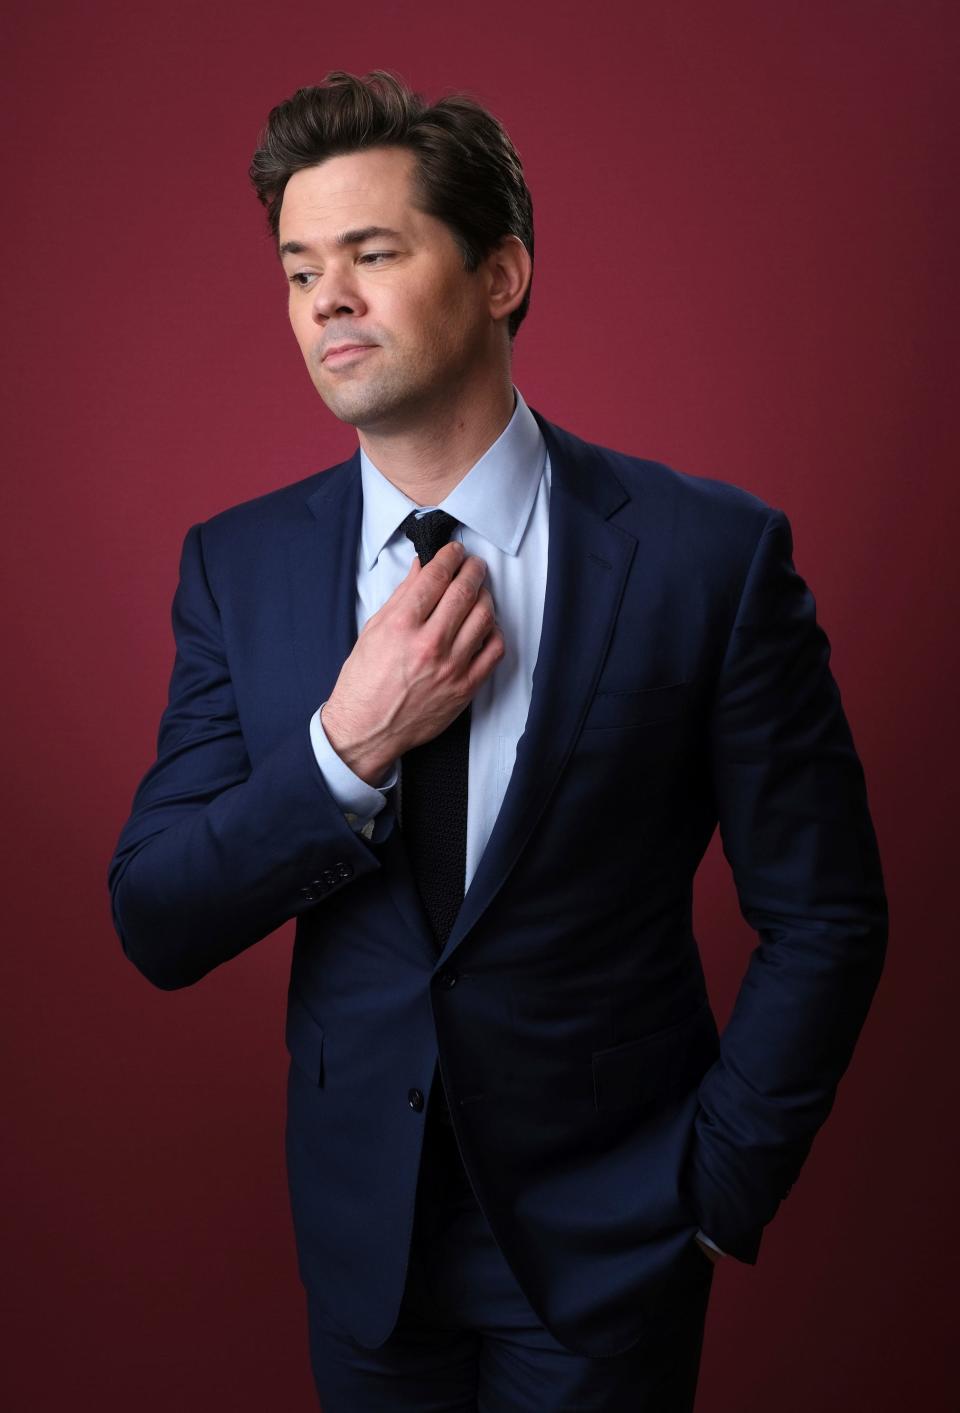 Andrew Rannells has a message for you. Do not call him a "guncle."